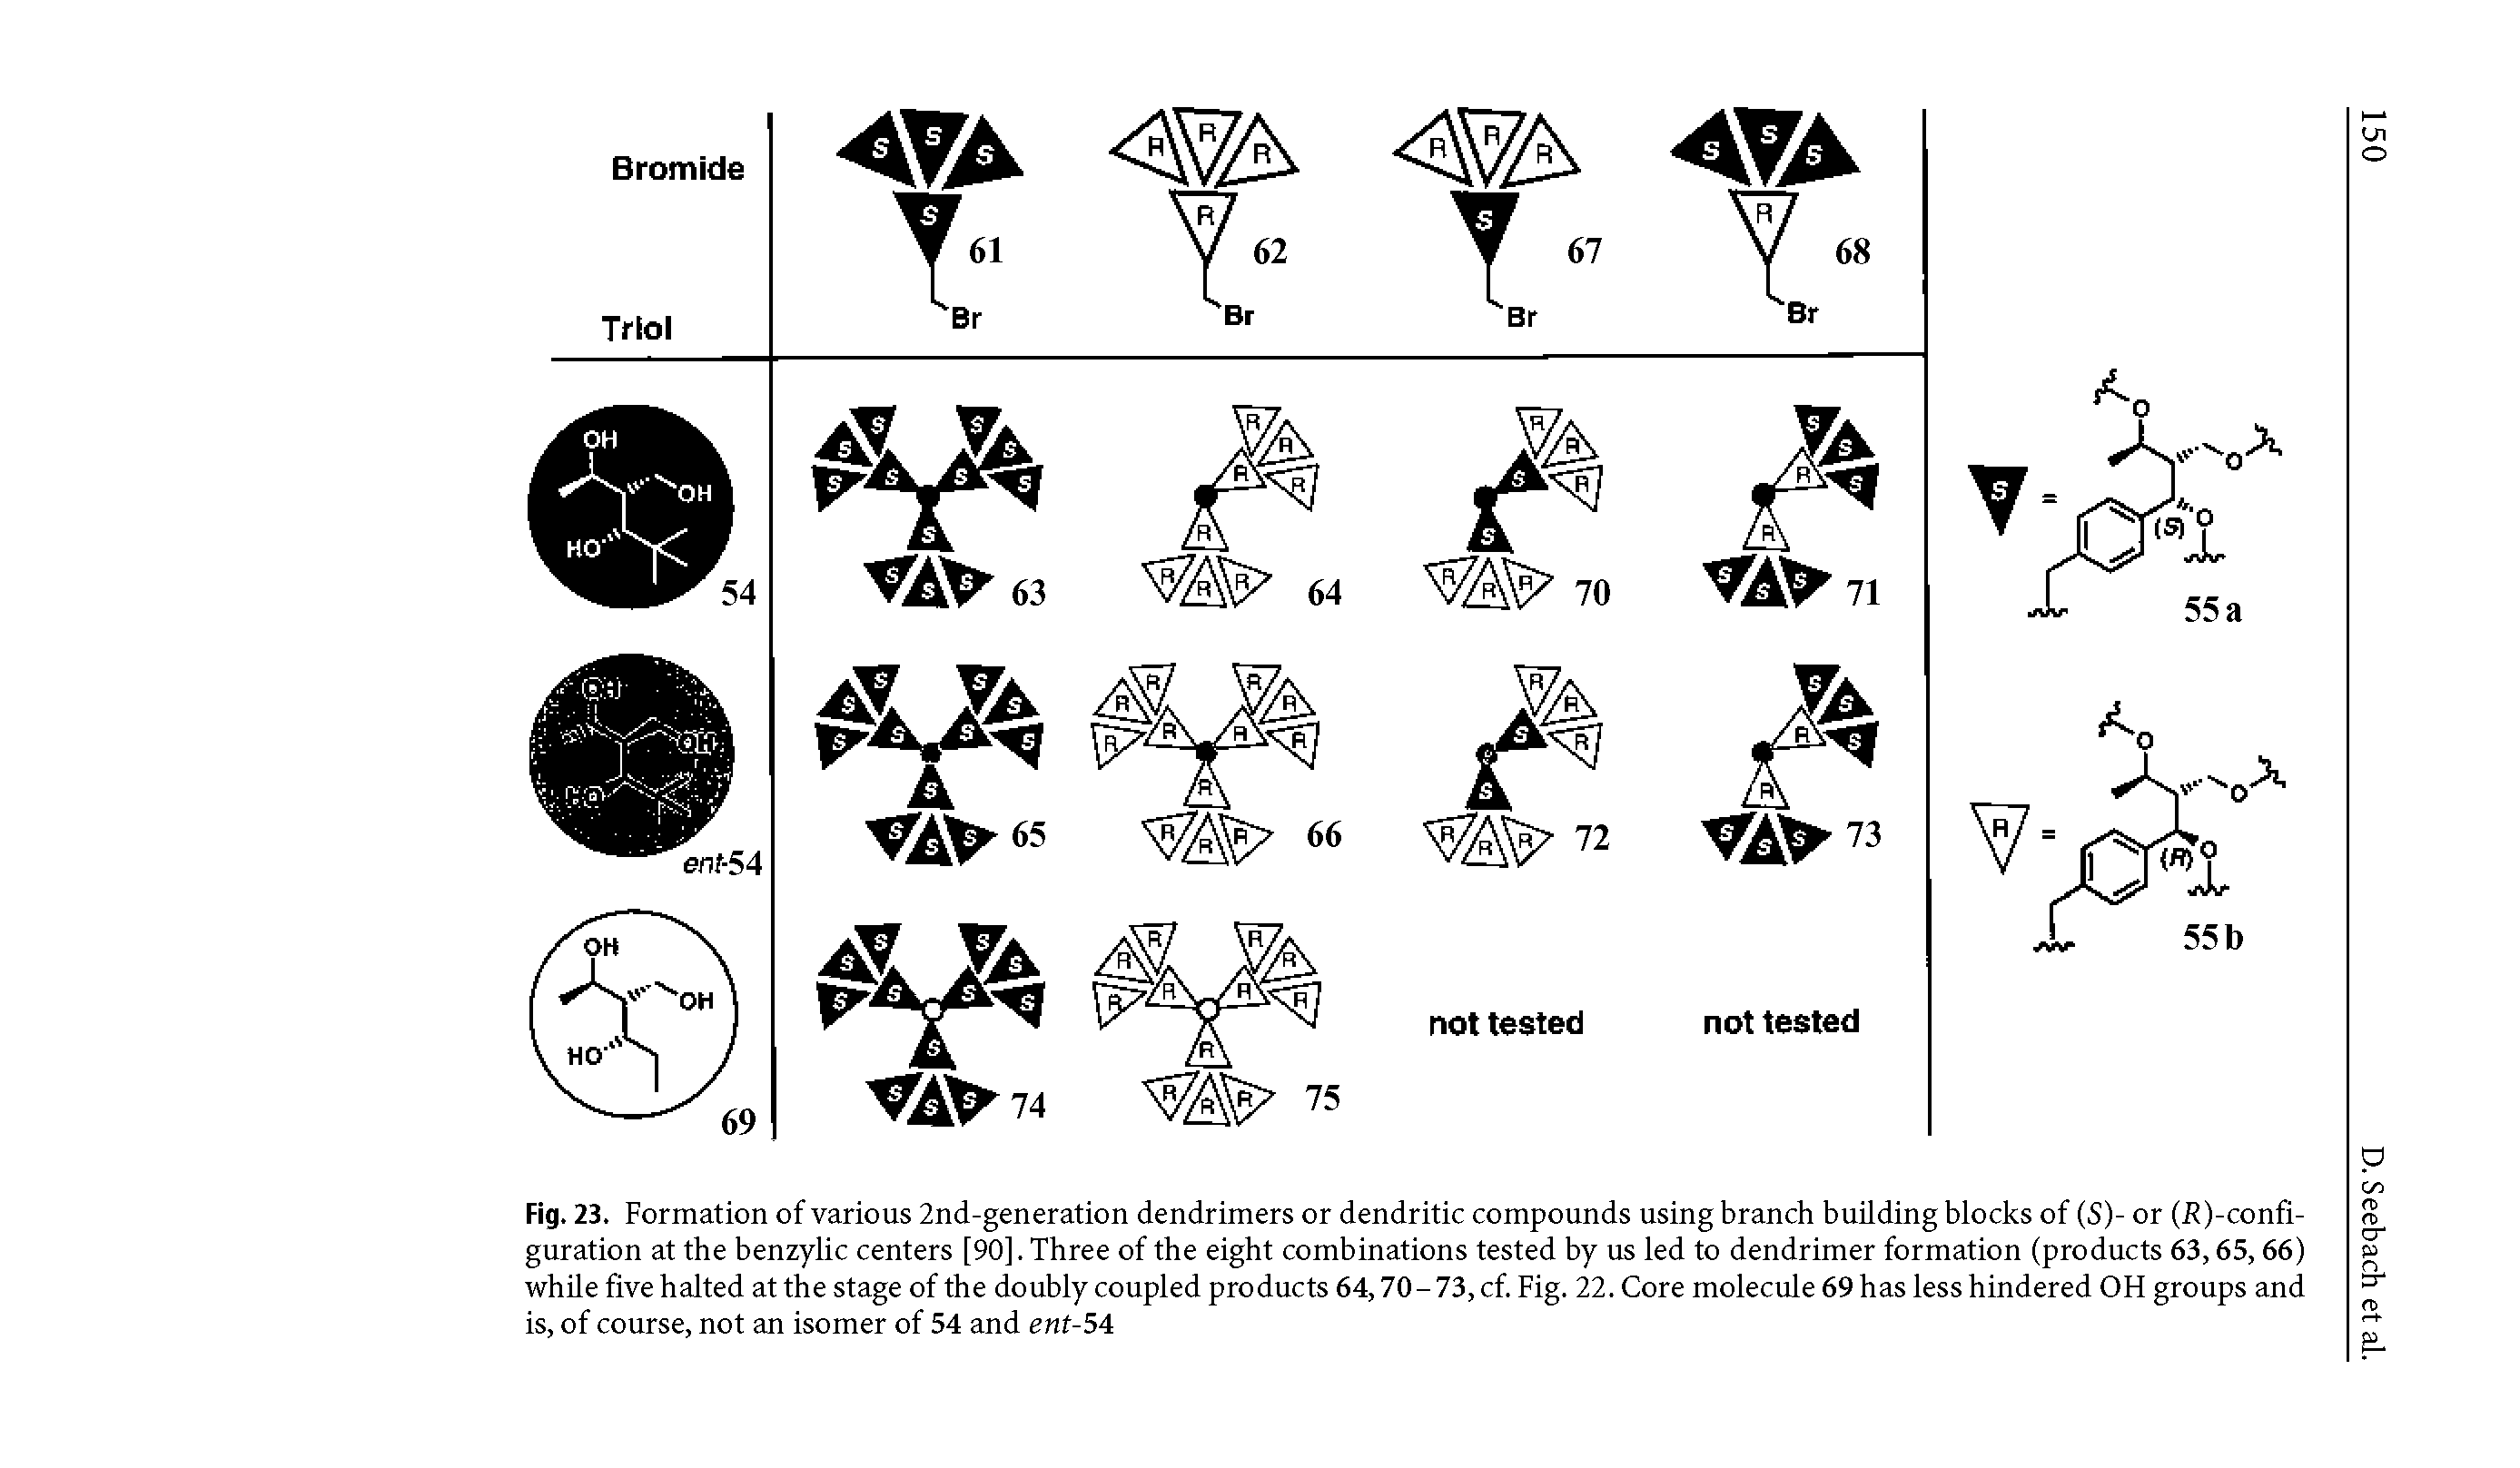 Fig. 23. Formation of various 2nd-generation dendrimers or dendritic compounds using branch building blocks of (S)- or (.Reconfiguration at the benzylic centers [90], Three of the eight combinations tested by us led to dendrimer formation (products 63,65,66) while five halted at the stage of the doubly coupled products 64,70-73, cf. Fig. 22. Core molecule 69 has less hindered OH groups and is, of course, not an isomer of 54 and ent-54...